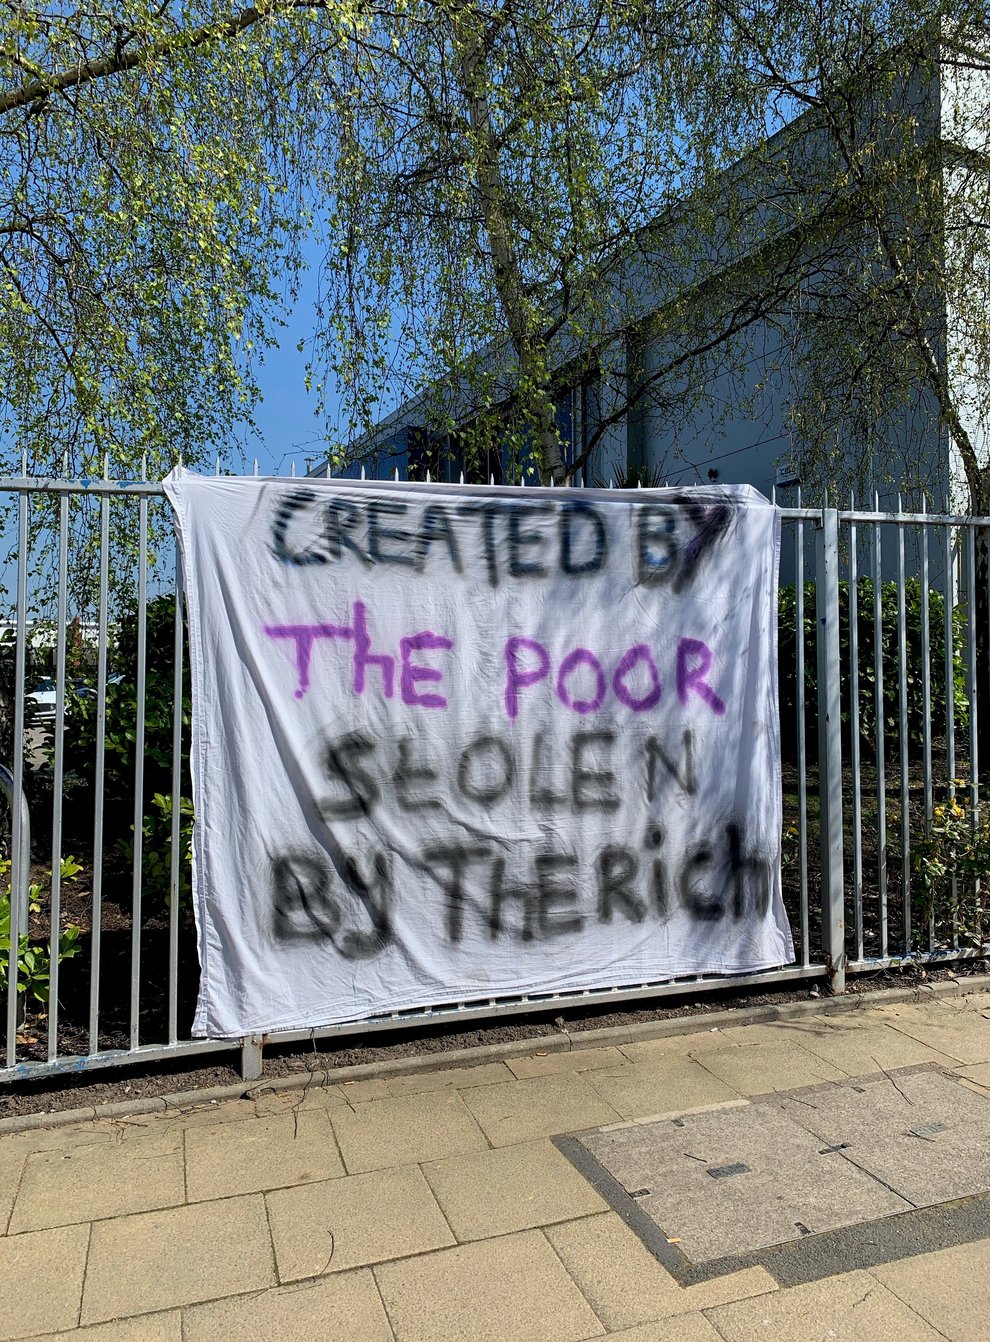 Created by the poor stolen by the rich banner